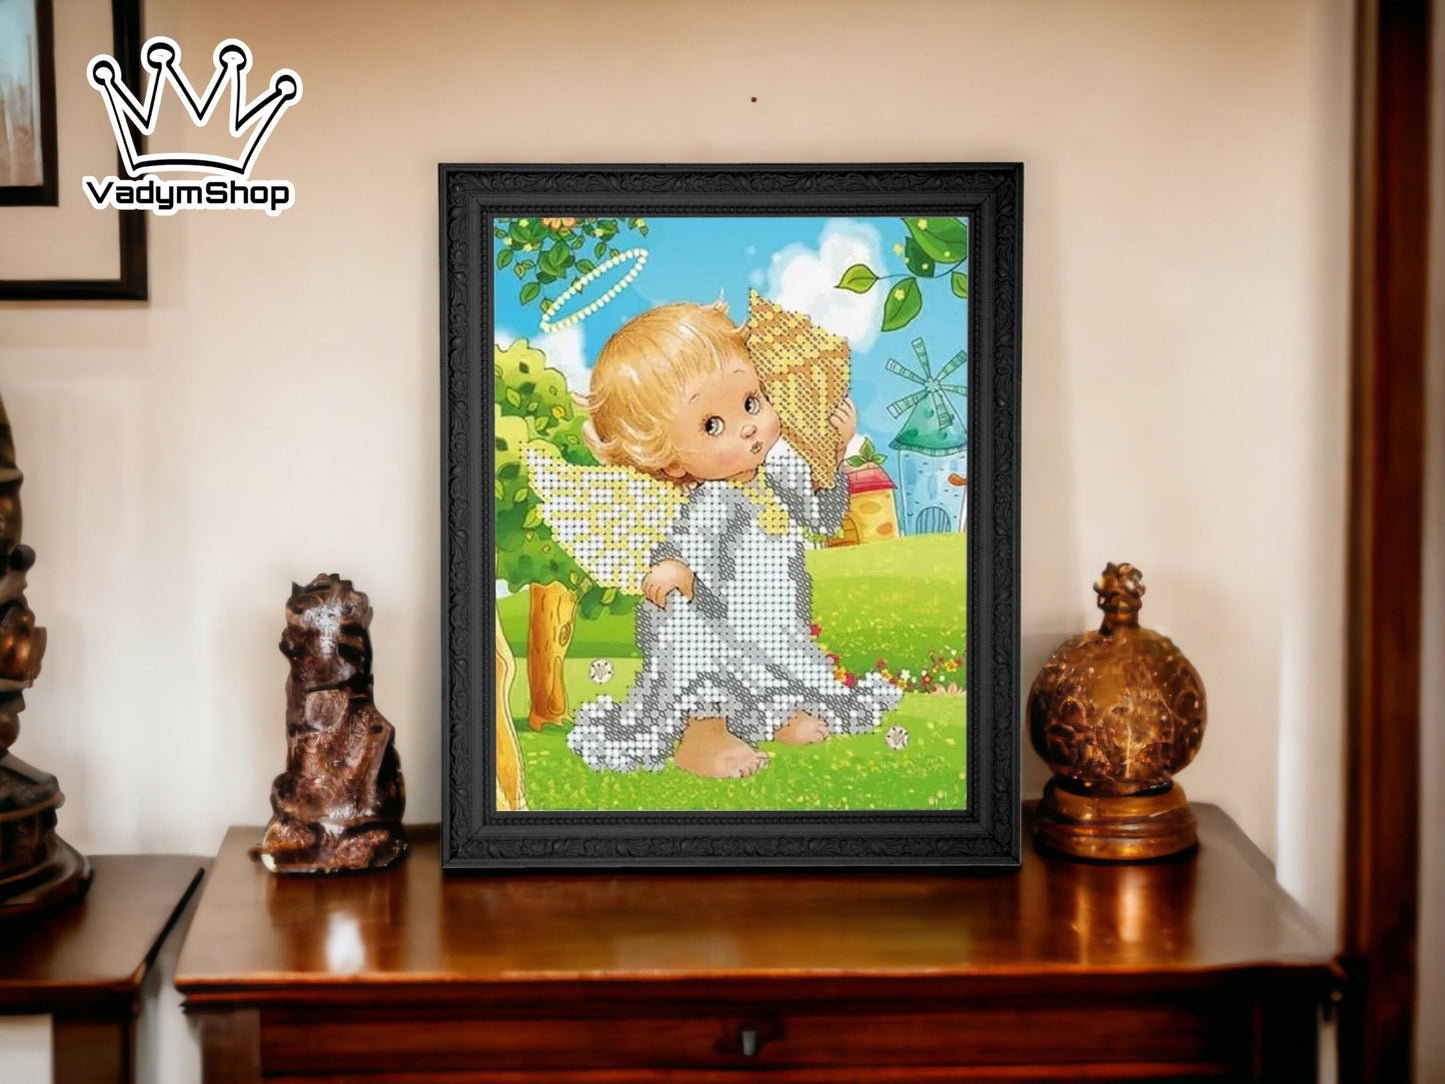 Small Bead embroidery kit "Angel with a shell". Size: 5.5-6.7 in (14-17cm) - VadymShop